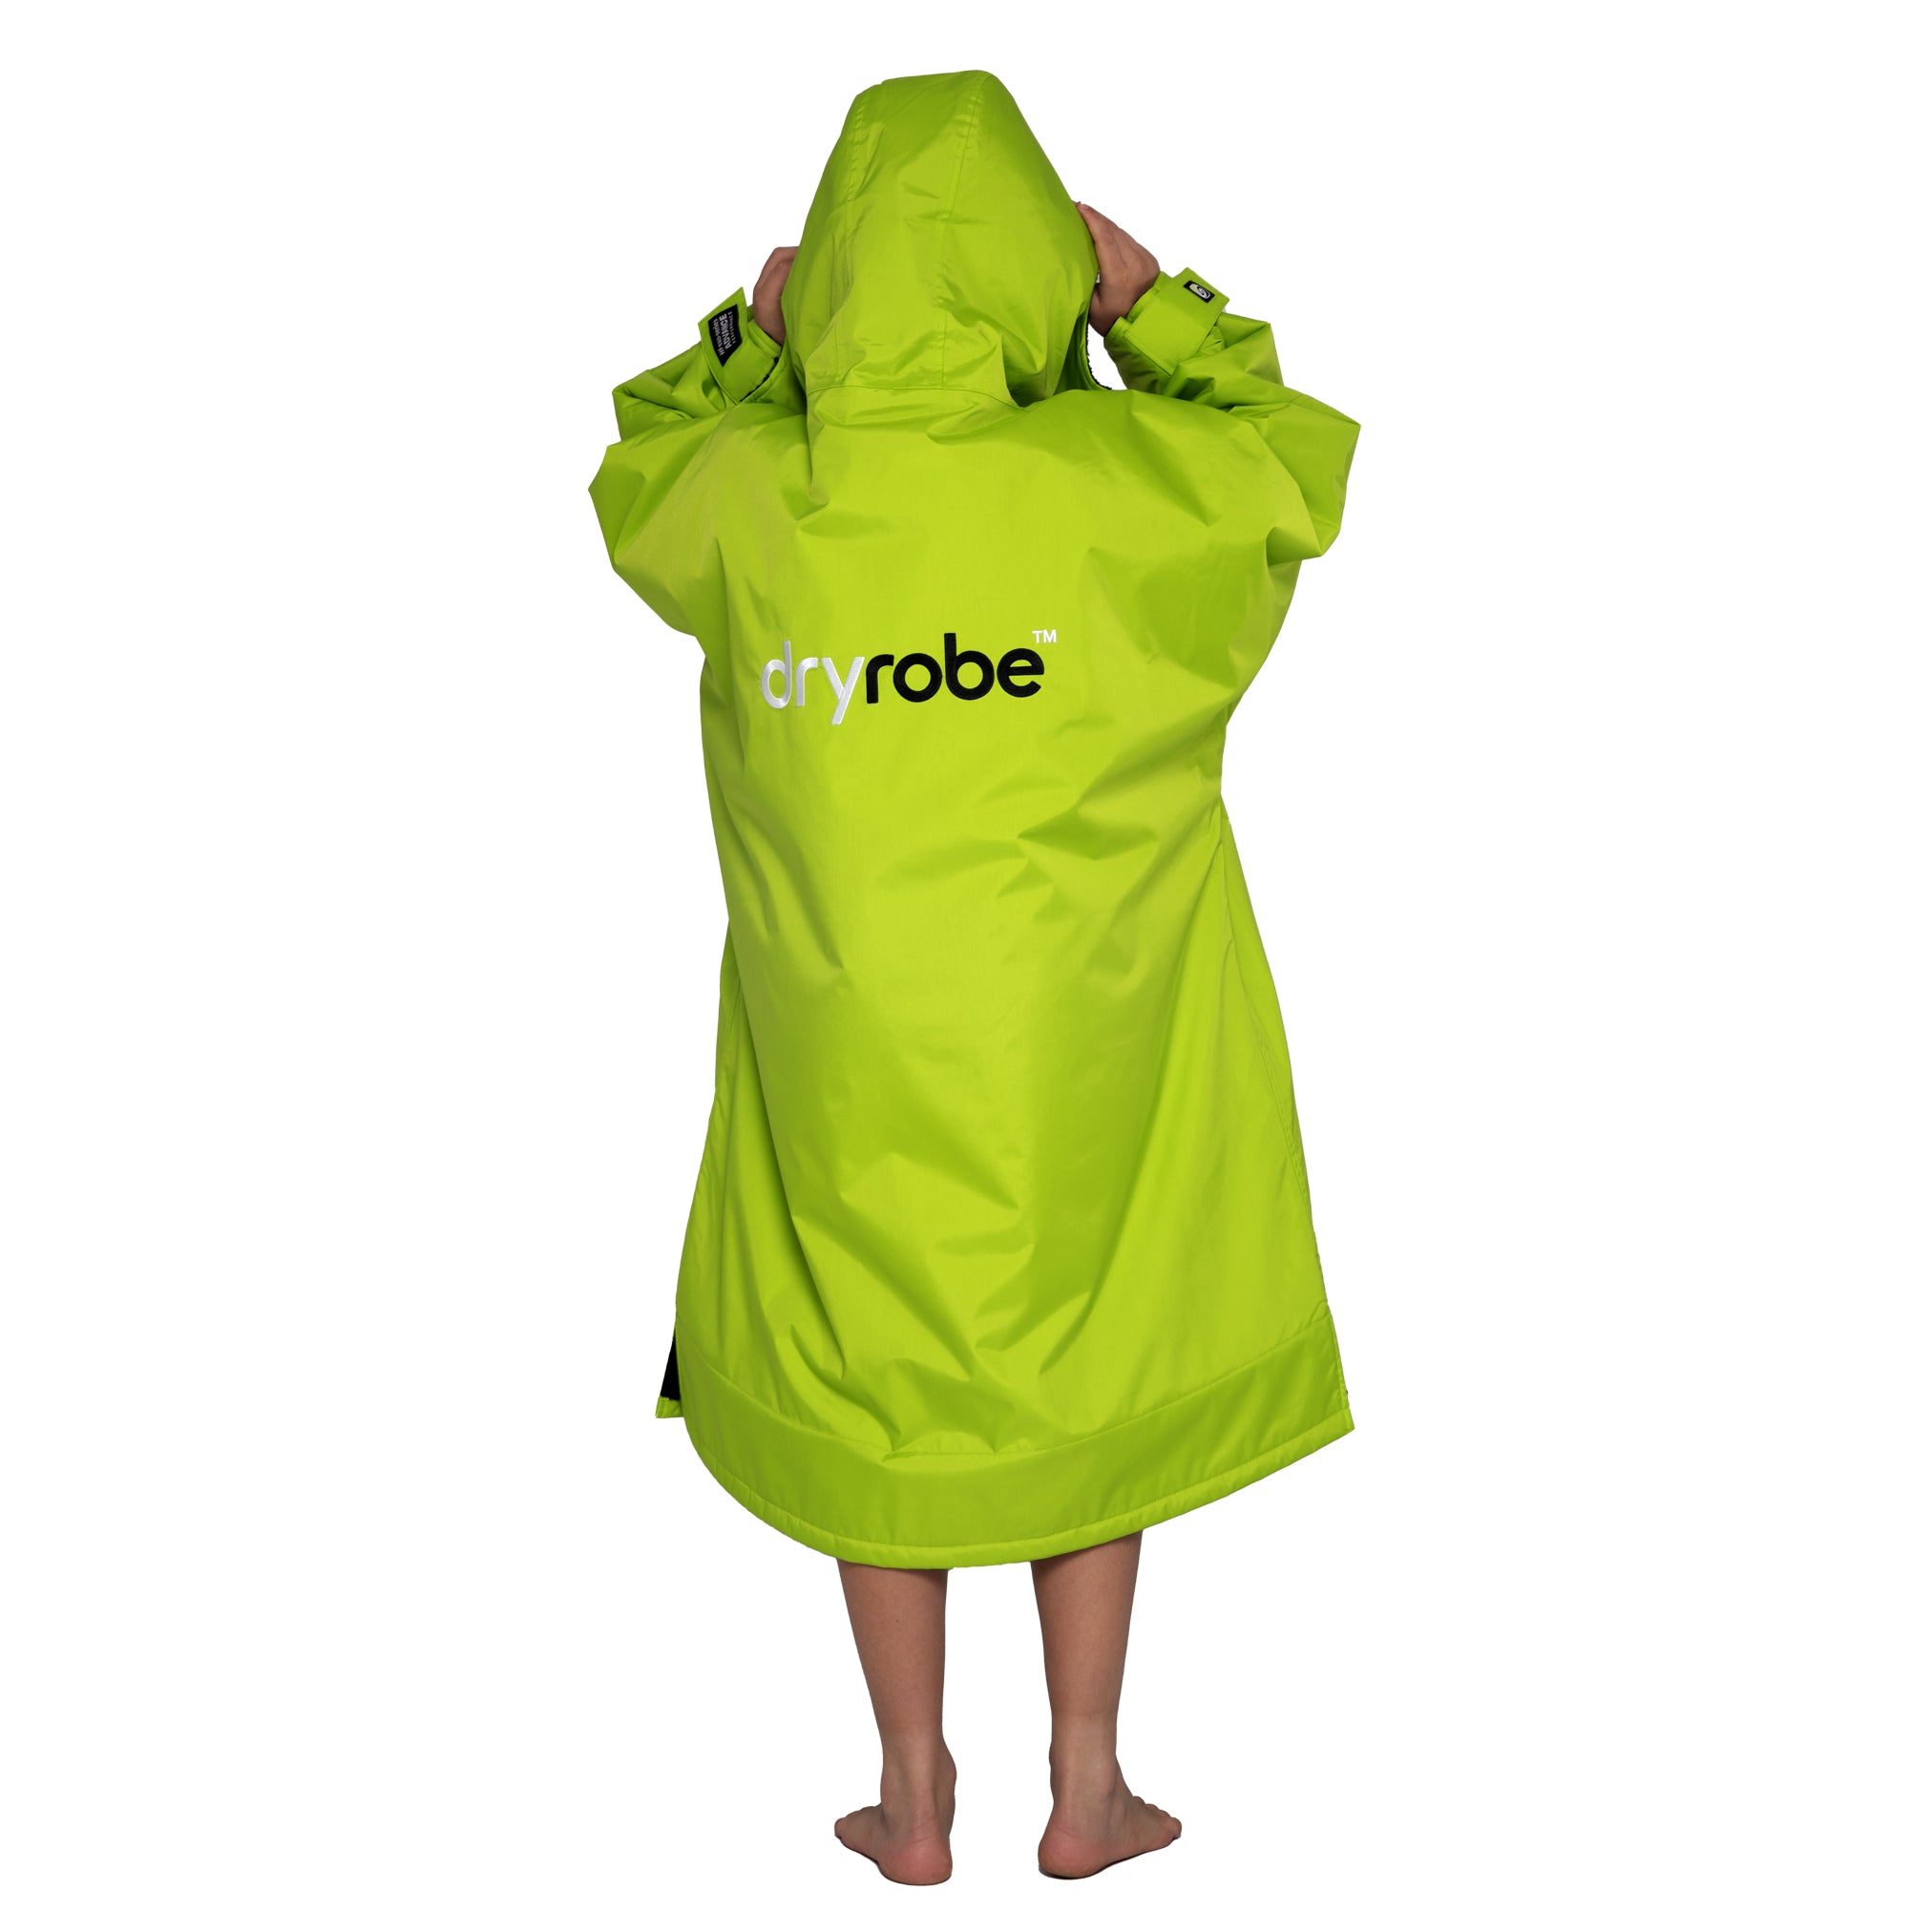 Boy wearing kids dryrobe® Advance change robe in lime green and black showing back view